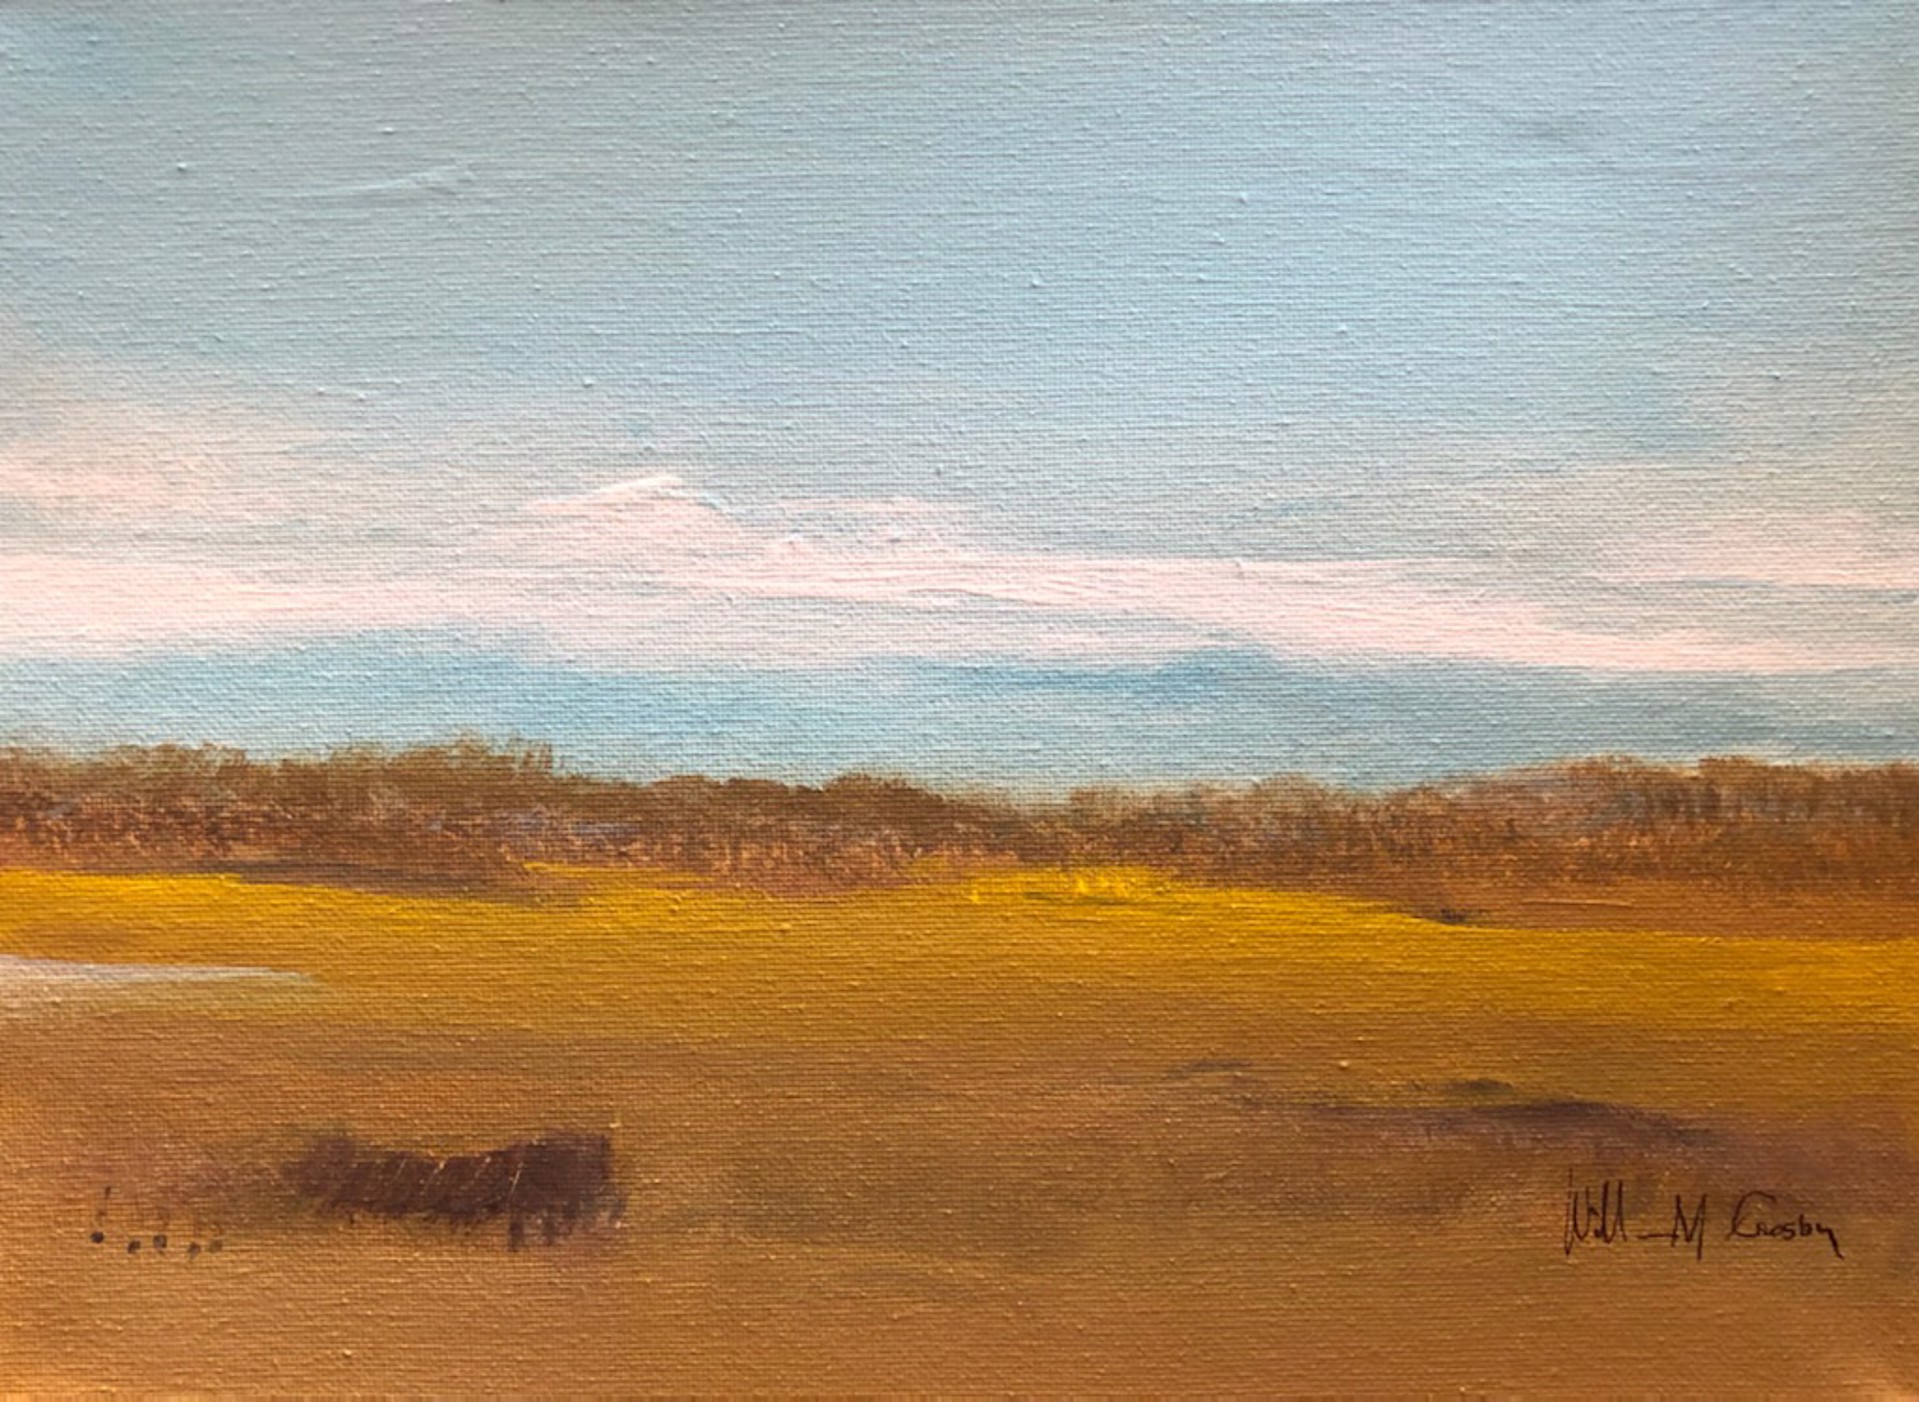 Golden Field by William Crosby - Small Works